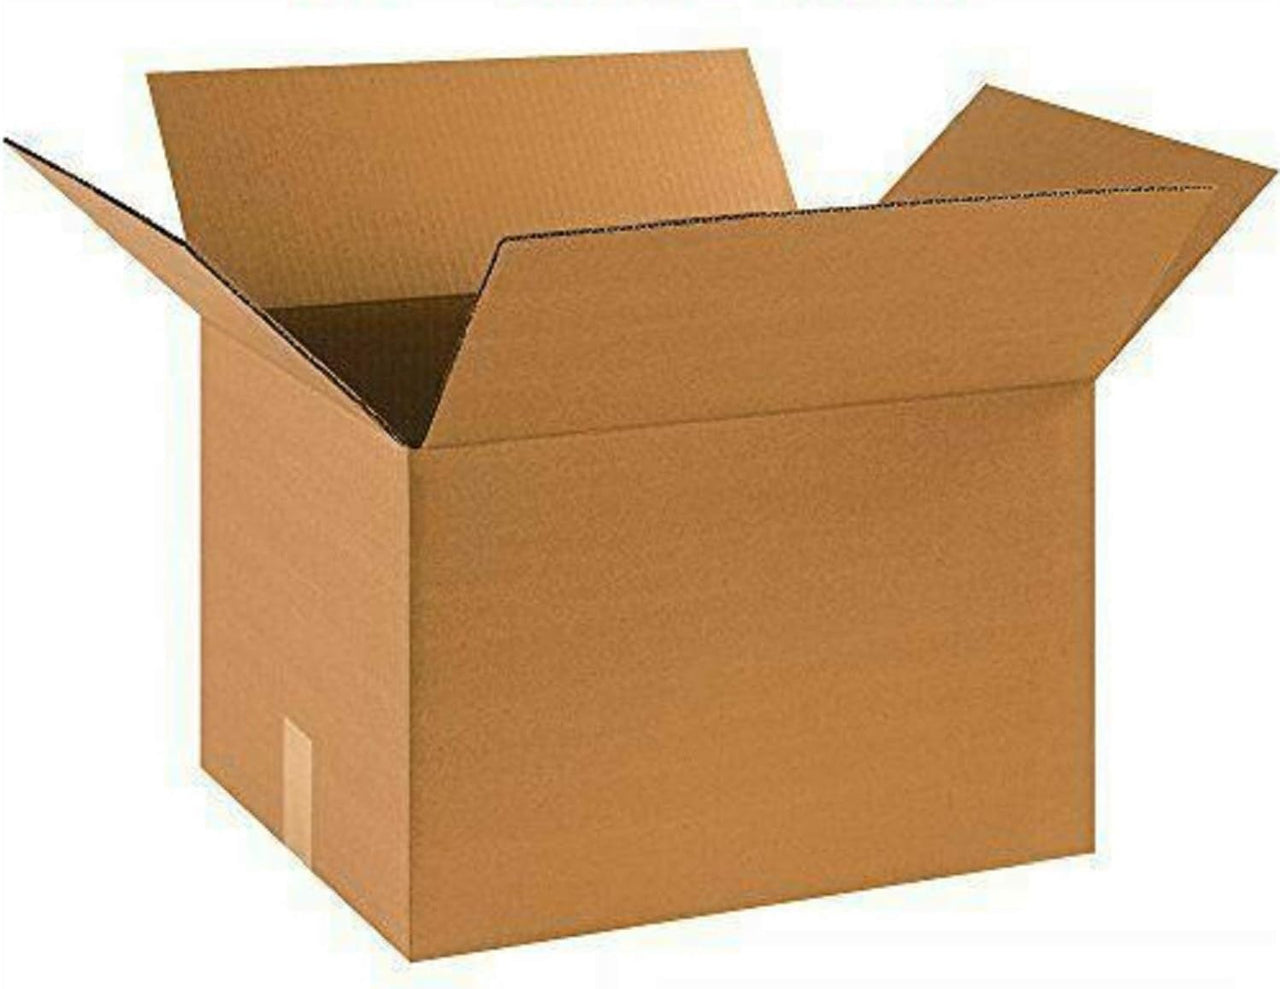 Shipping Boxes 8"L x 8"W x 8"H 25-Pack Corrugated Cardboard Box for Packing Moving Storage